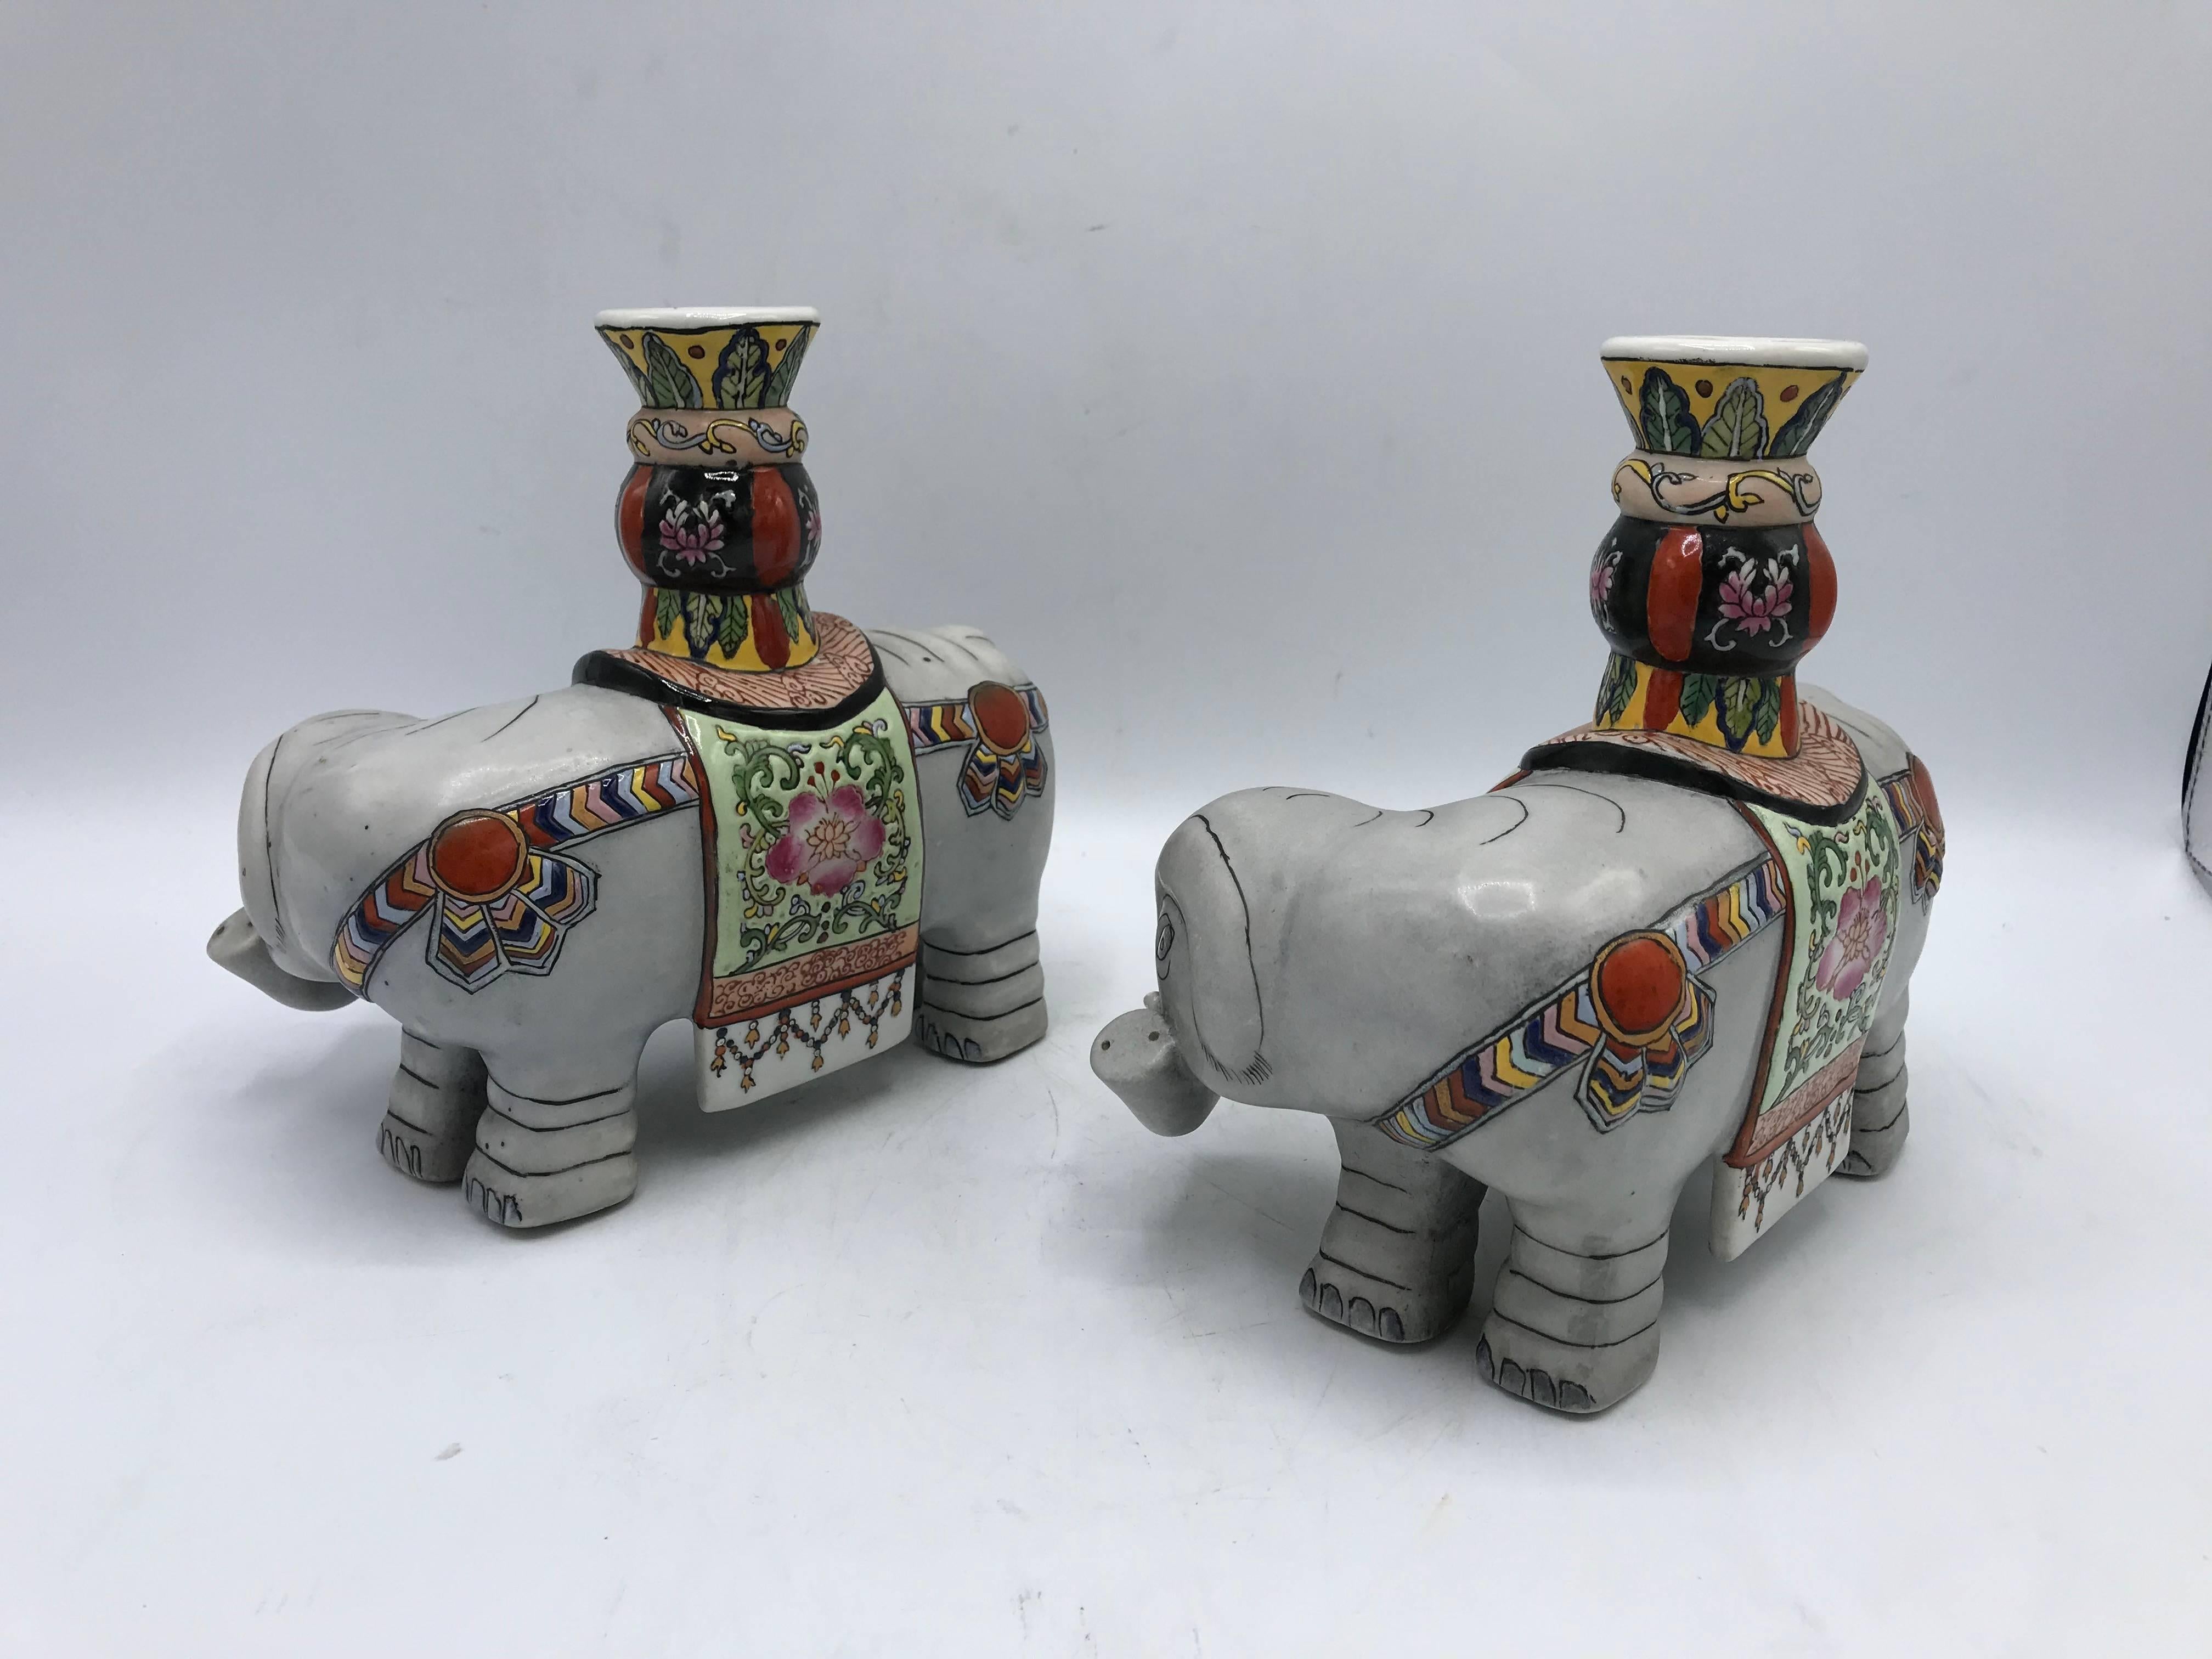 Chinoiserie 1960s Polychrome Ceramic Elephant Sculpture Candlestick Holders, Pair For Sale